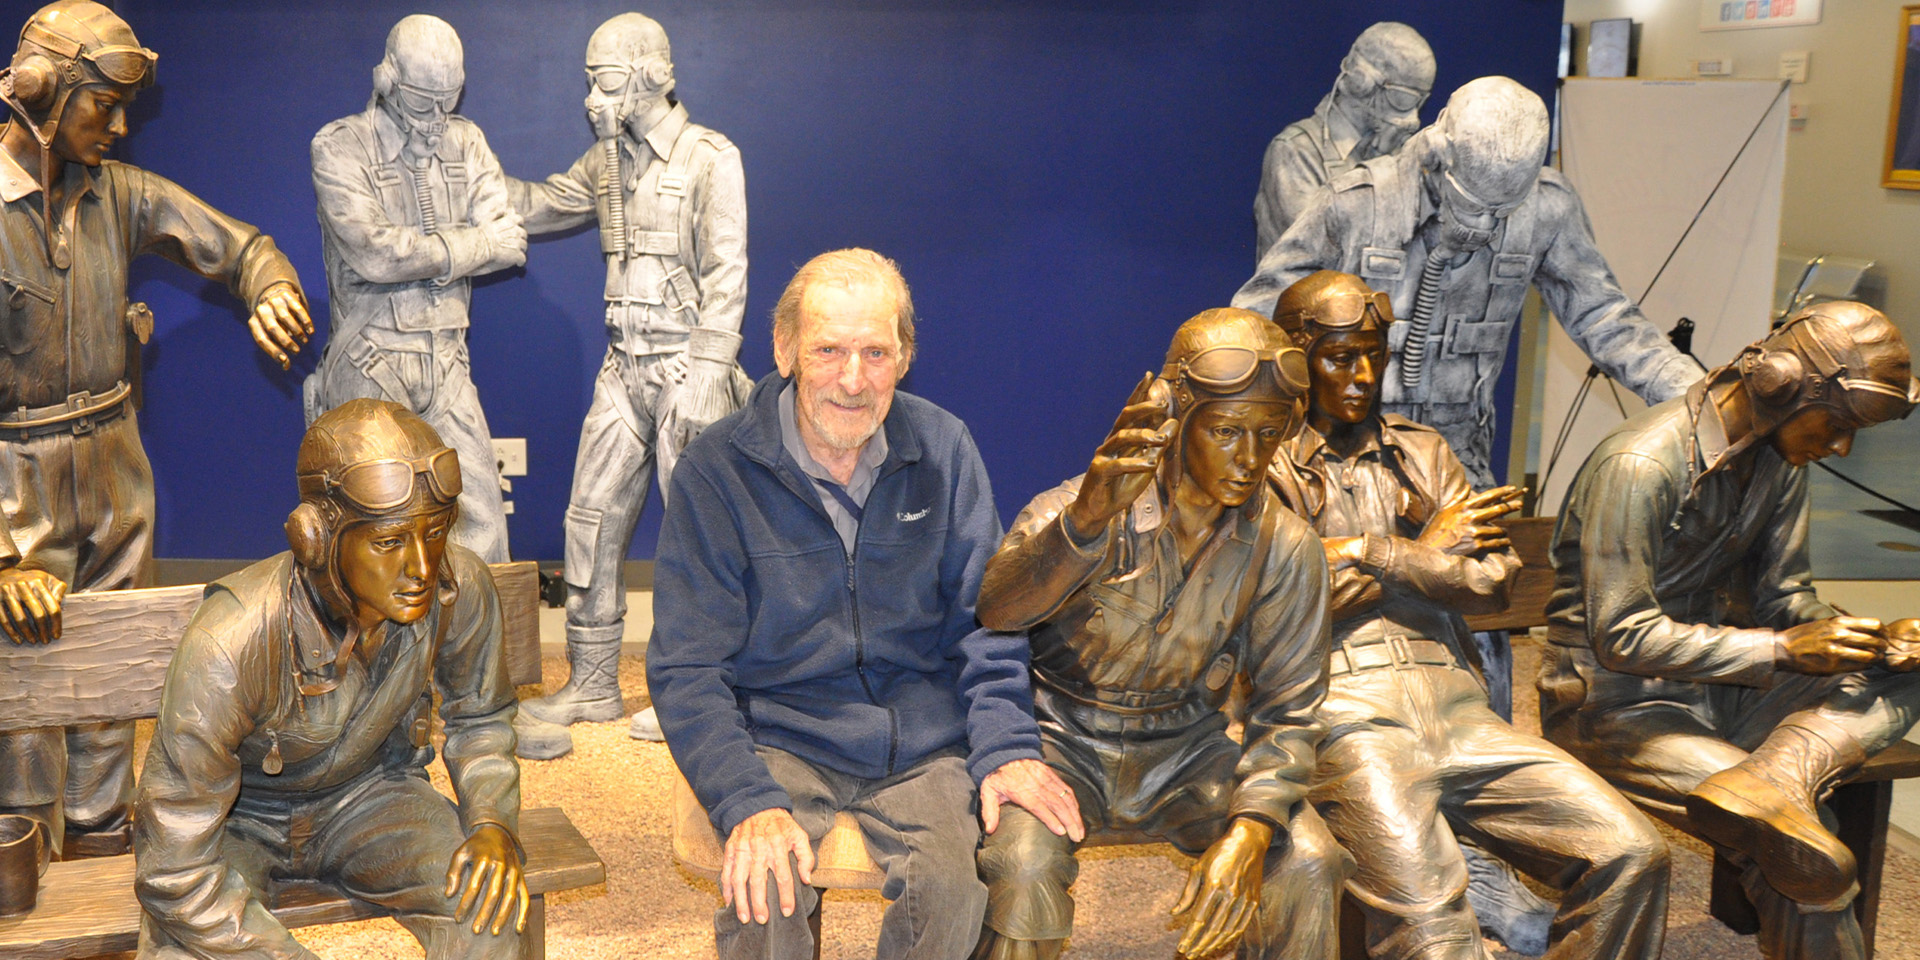 A white man with white hair sits among bronze statues featuring WWII serviceman.